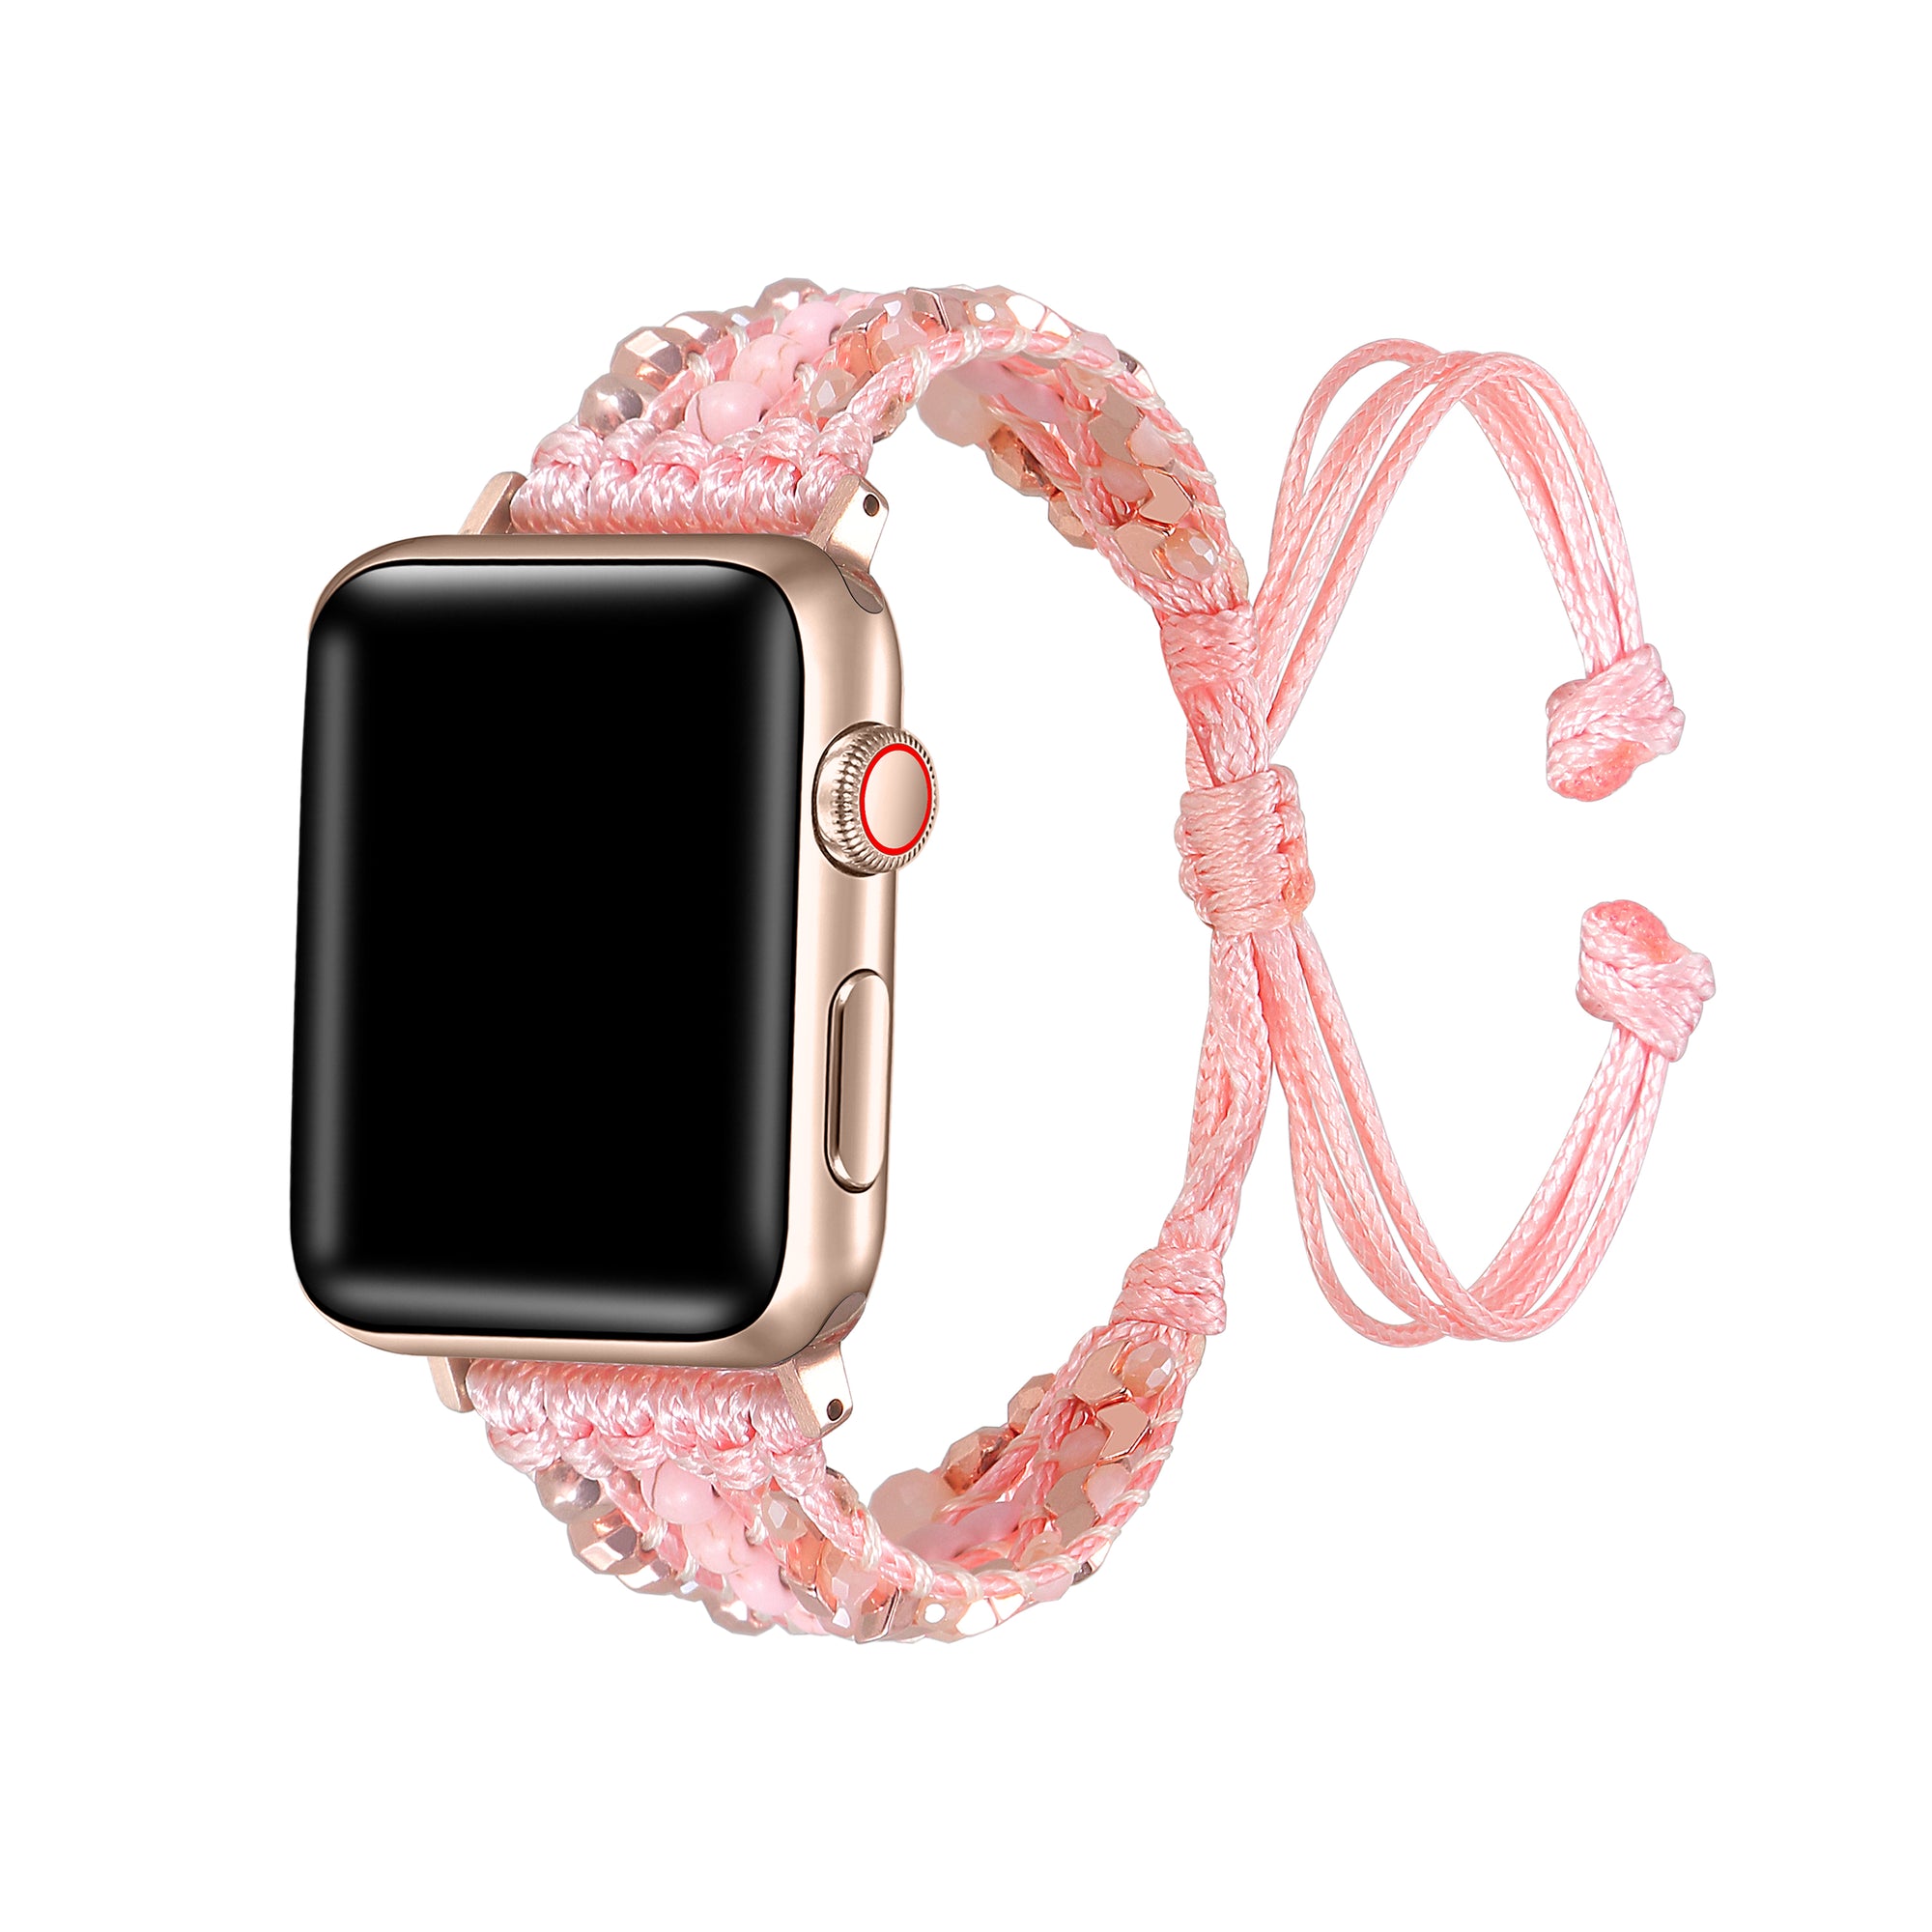 Gemma Weave Band for Apple Watch